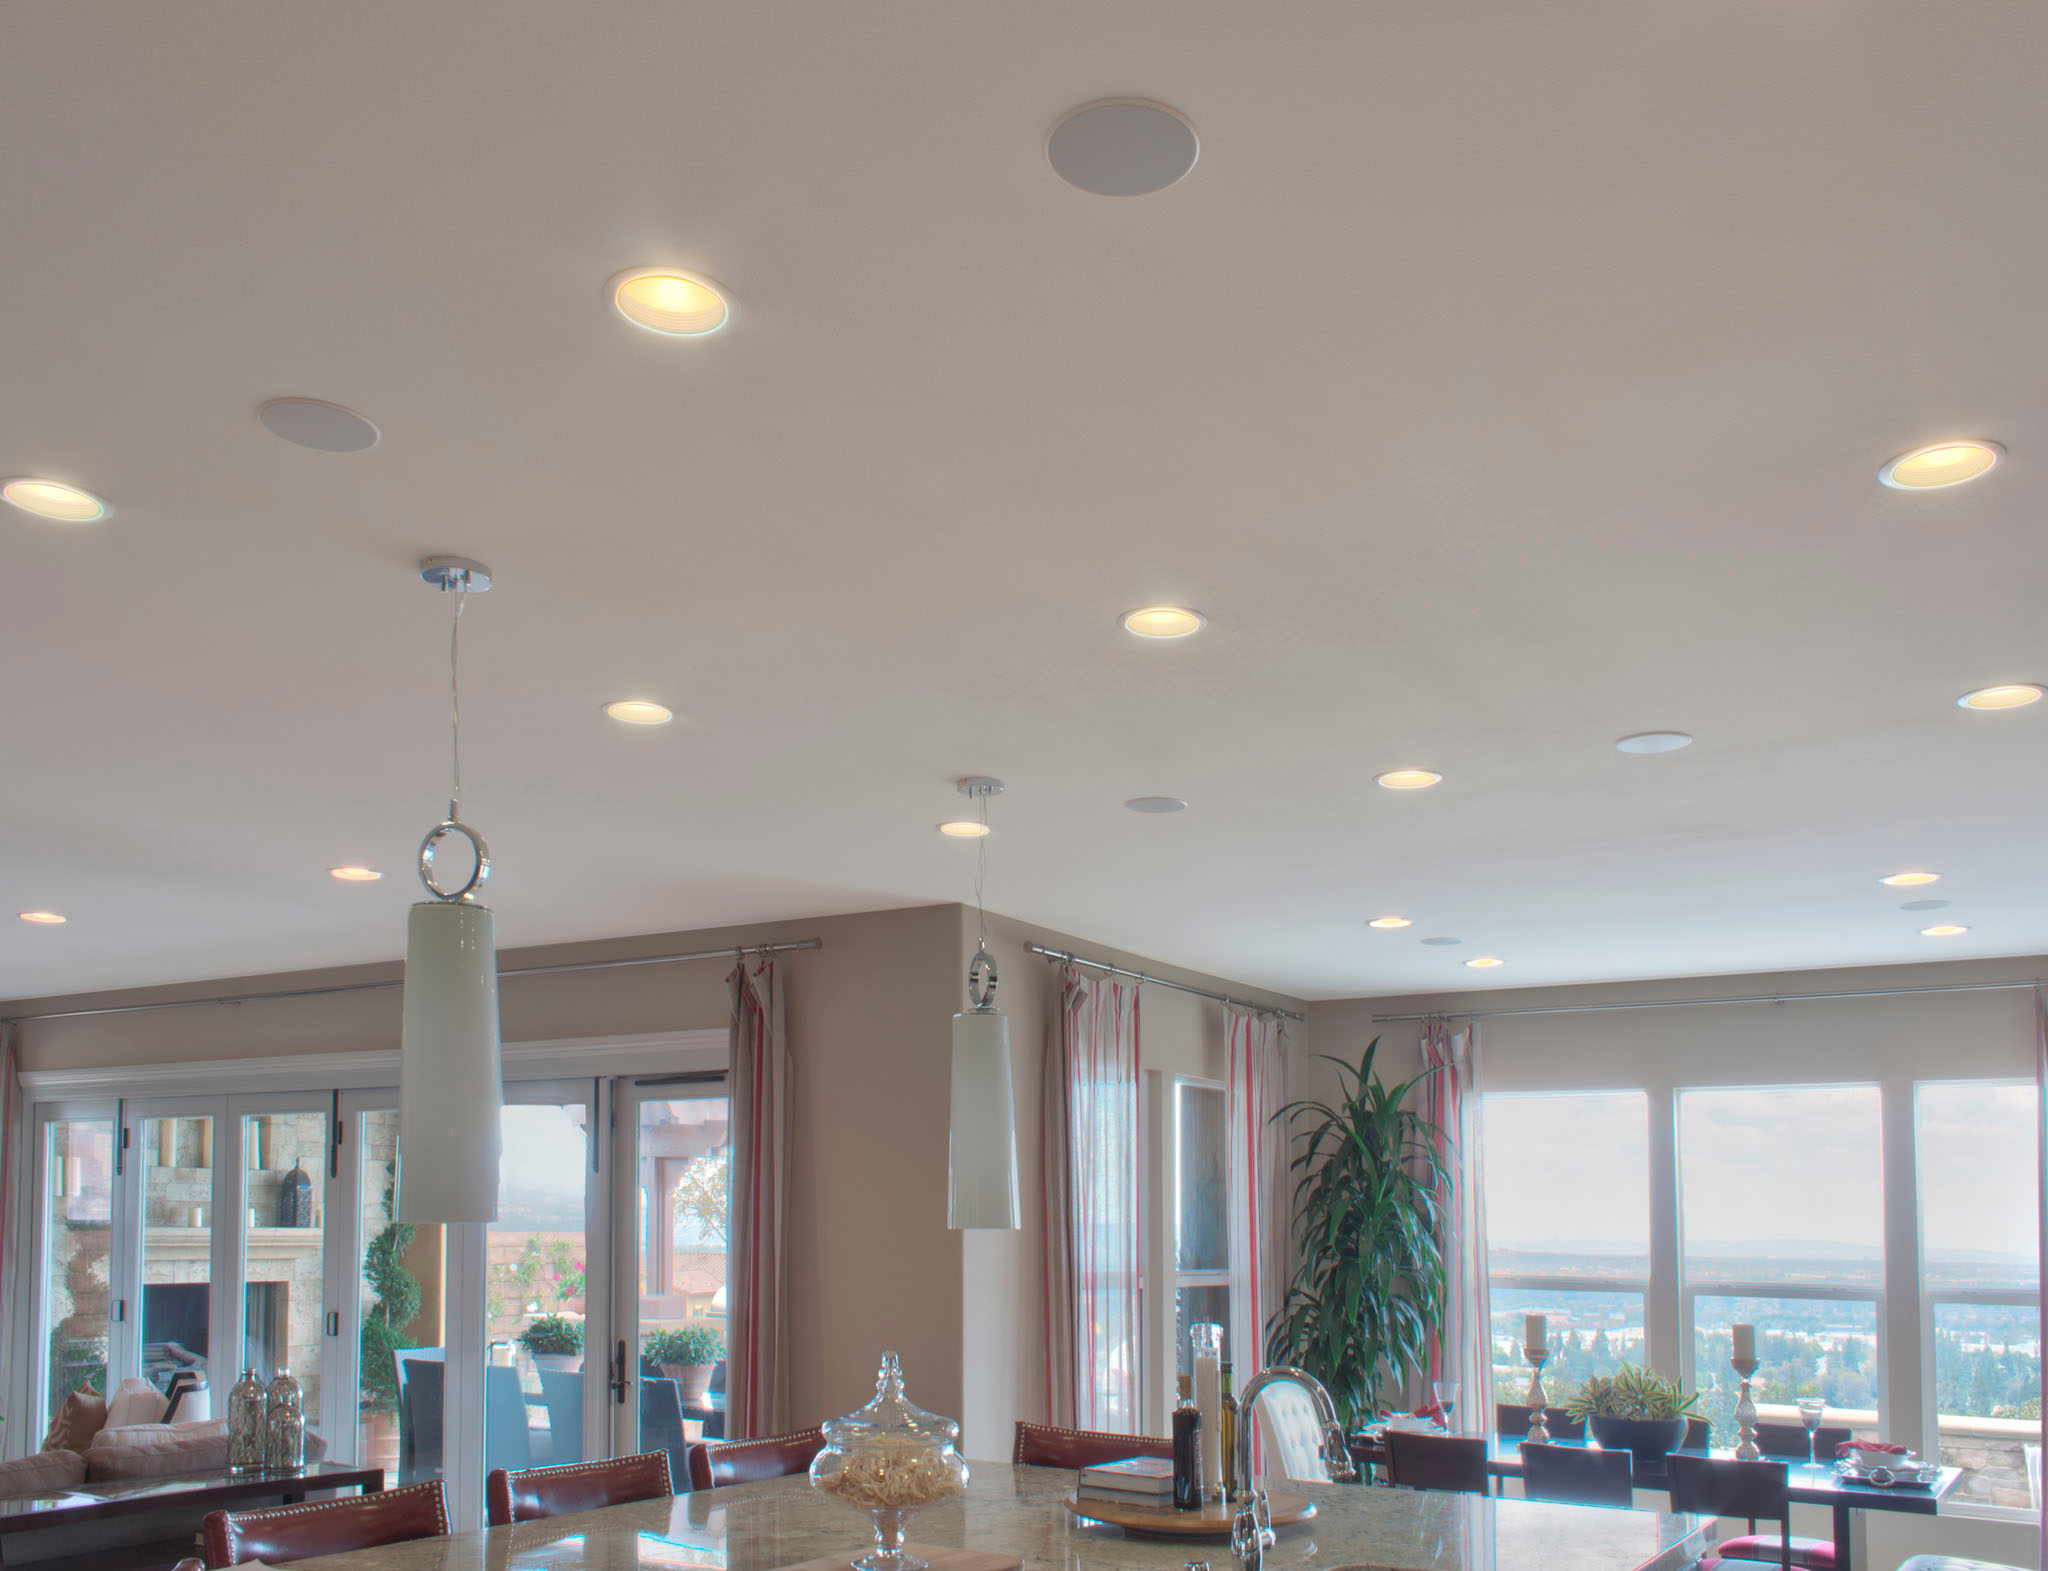 How To Install Ceiling Speakers In New Construction 